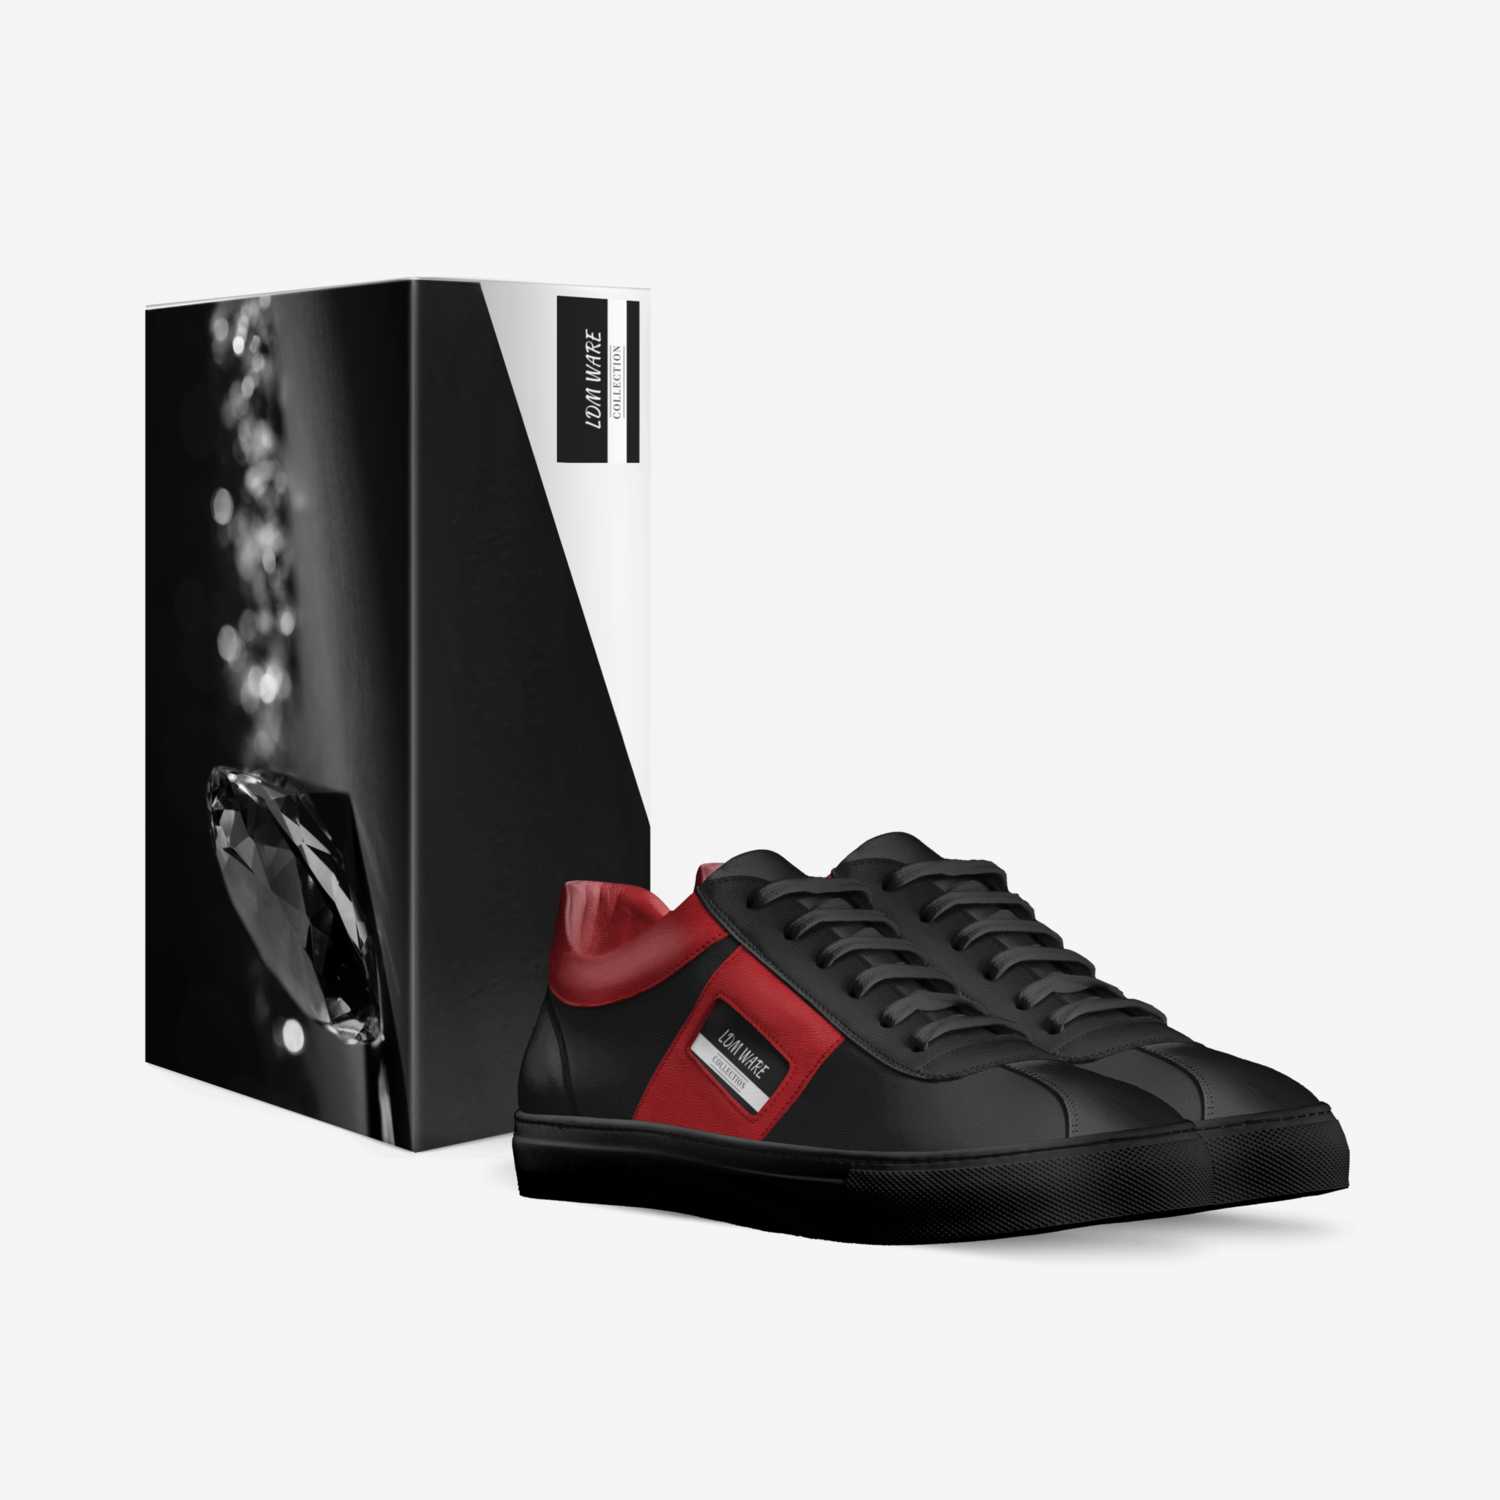 LDM WARE custom made in Italy shoes by Lonnie Mccullough | Box view